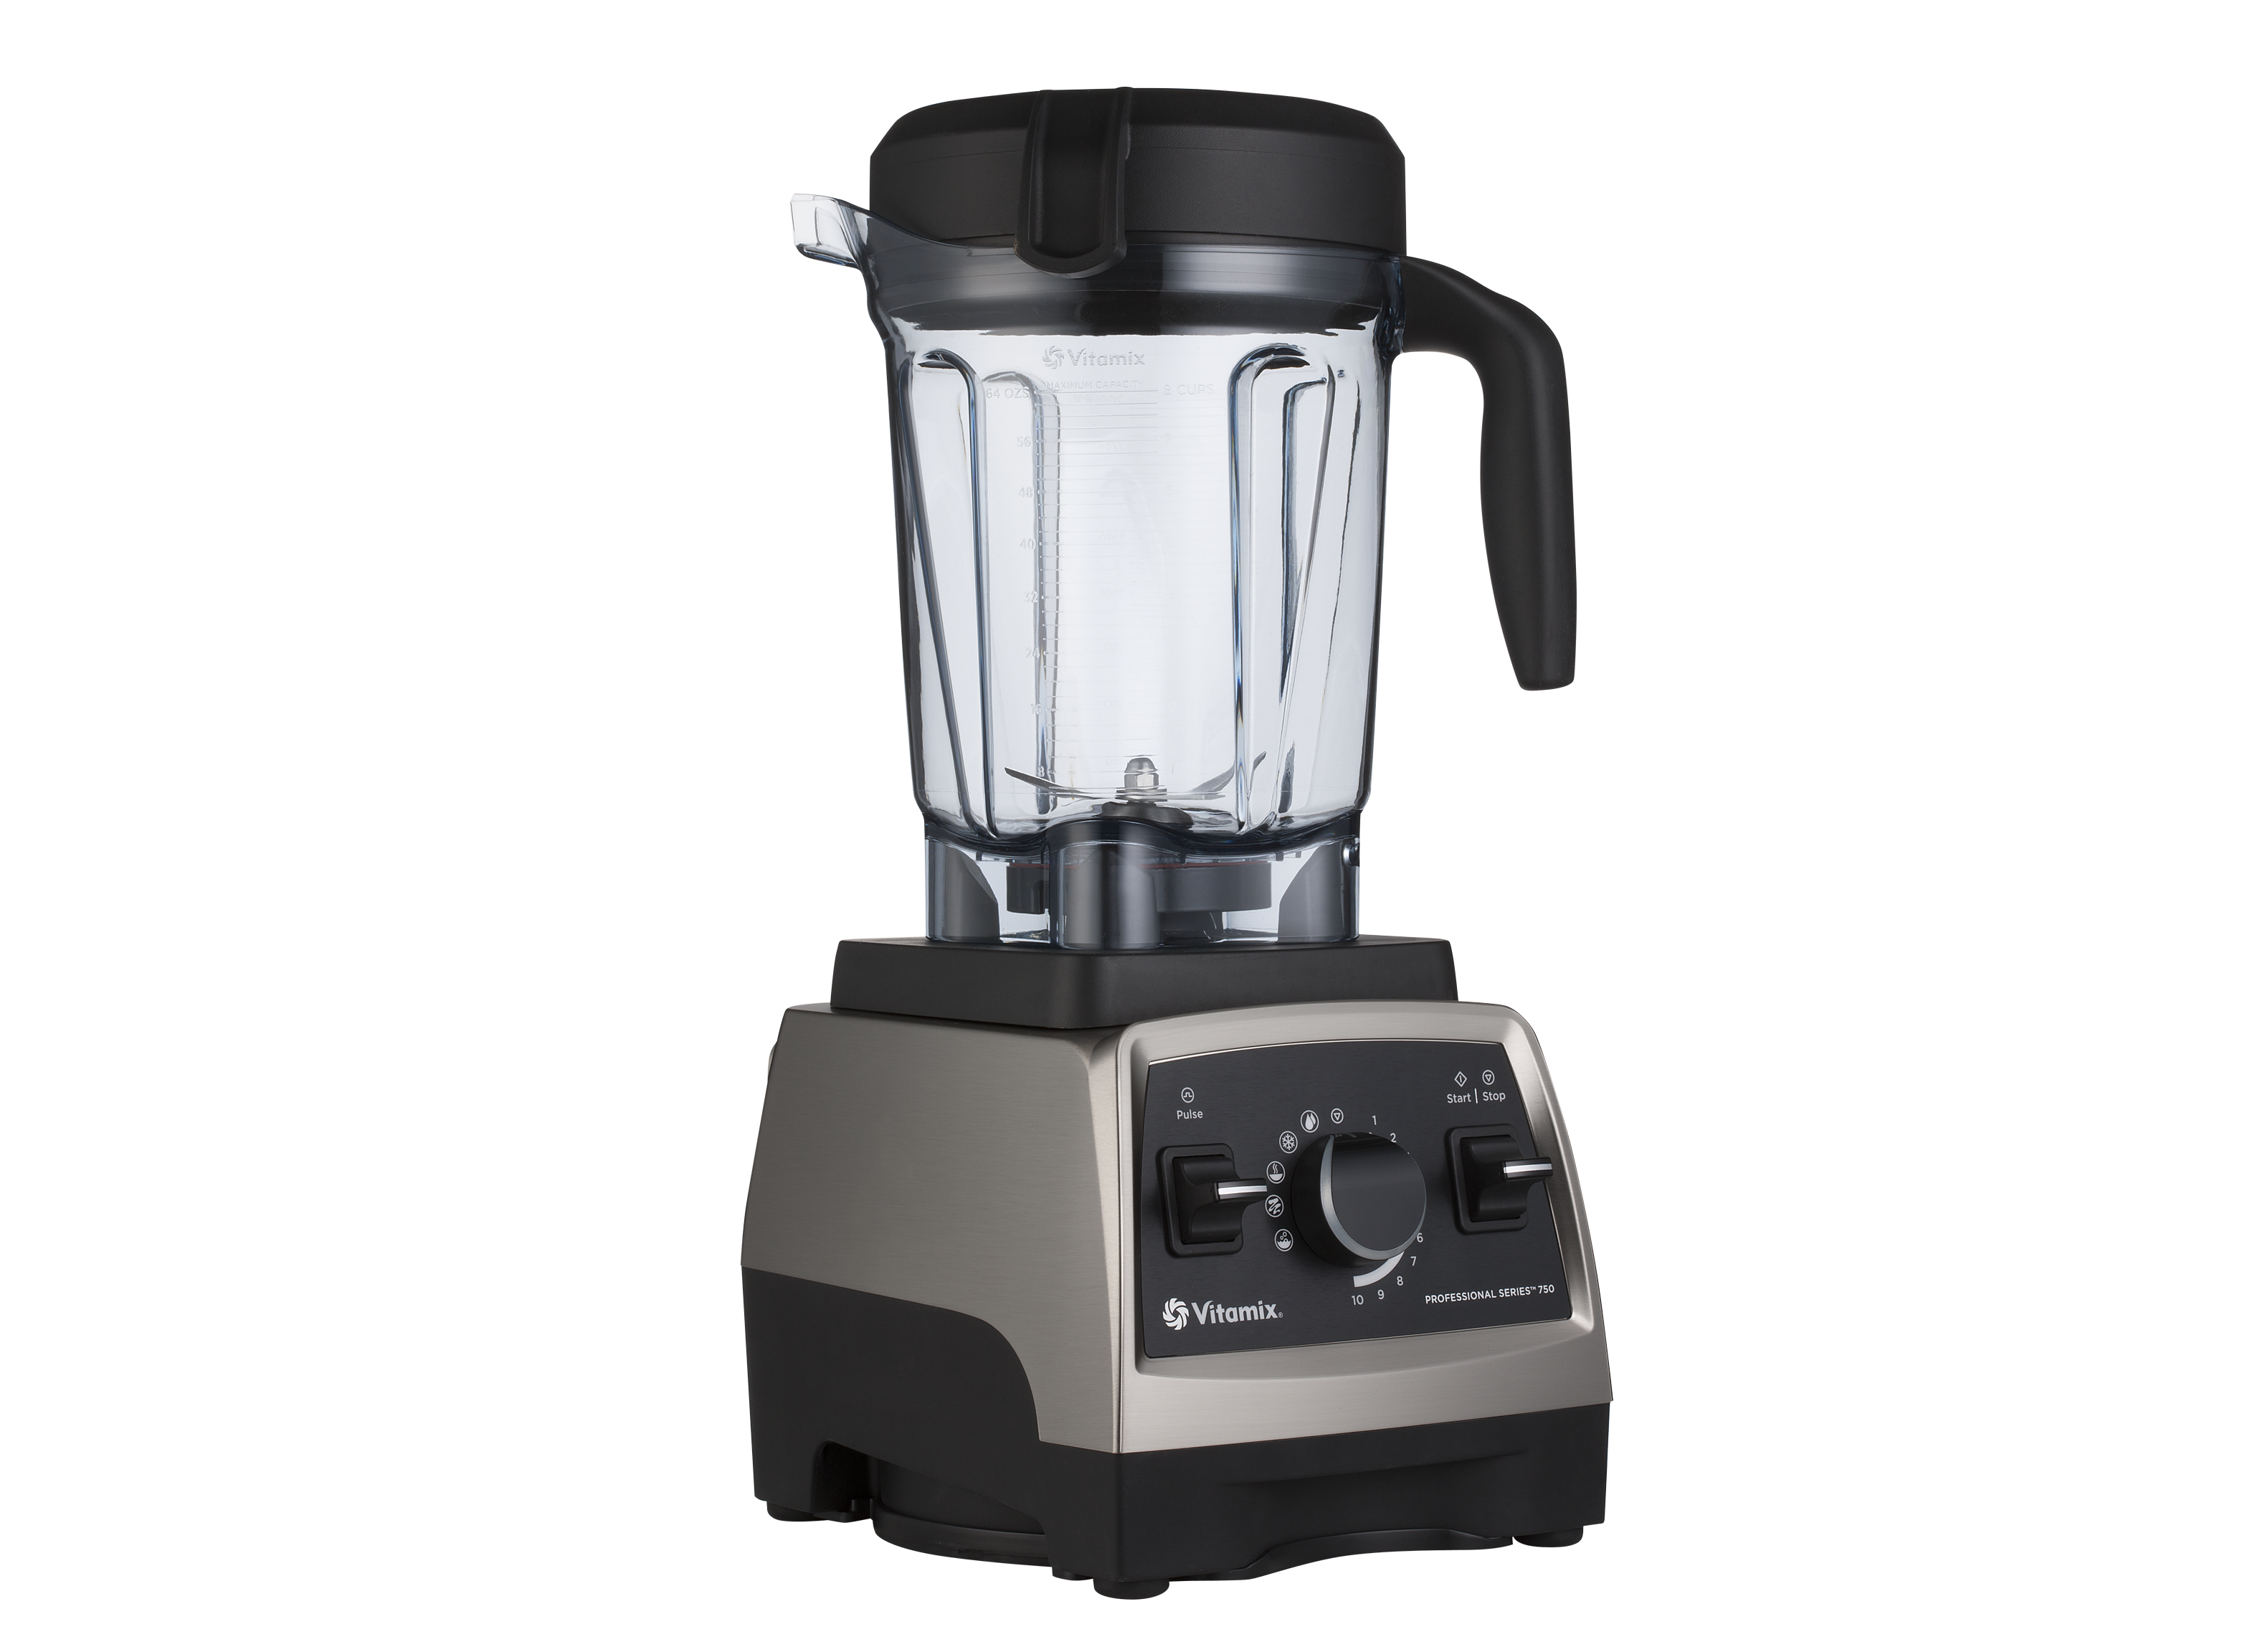 Vitamix Professional Series 750 Blender Review - Consumer Reports